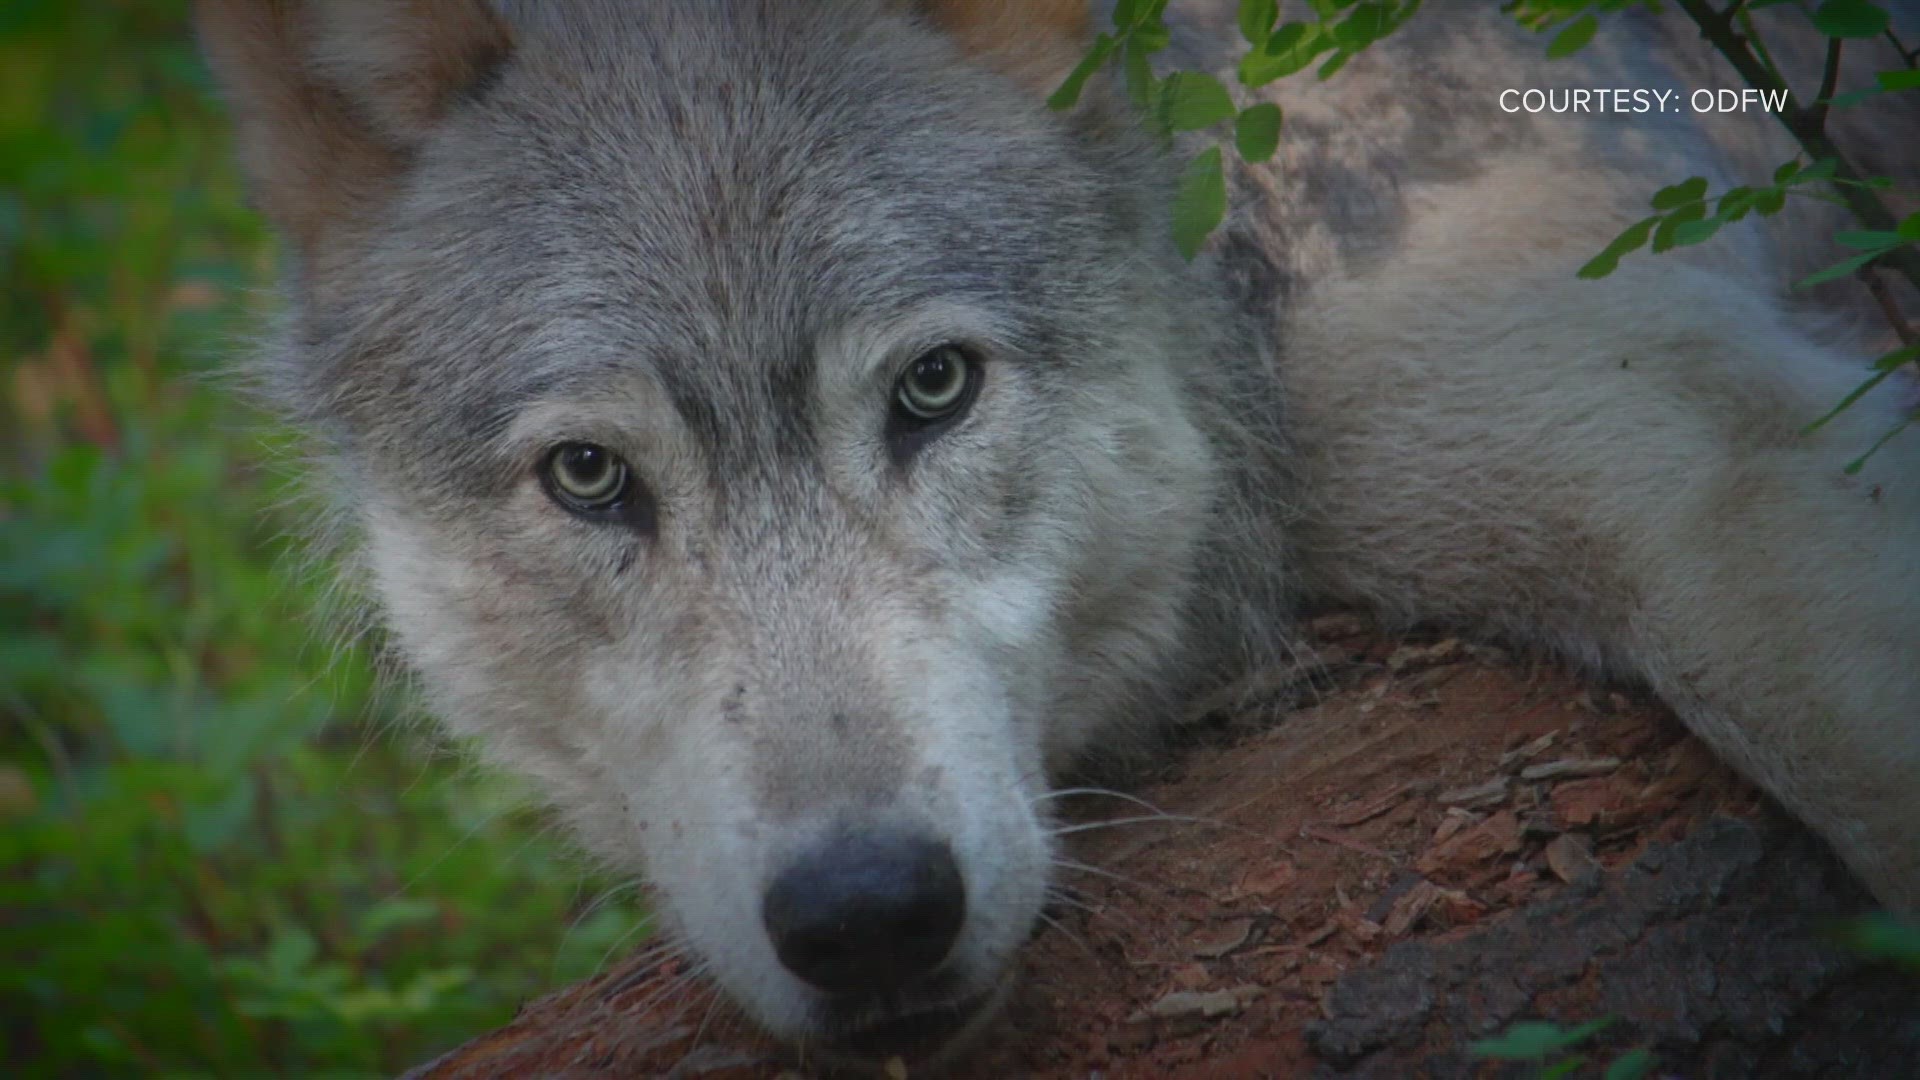 Colorado Parks and Wildlife can capture up to 10 wolves from Oregon. The wolves are supposed to be released in Colorado by Dec. 31.